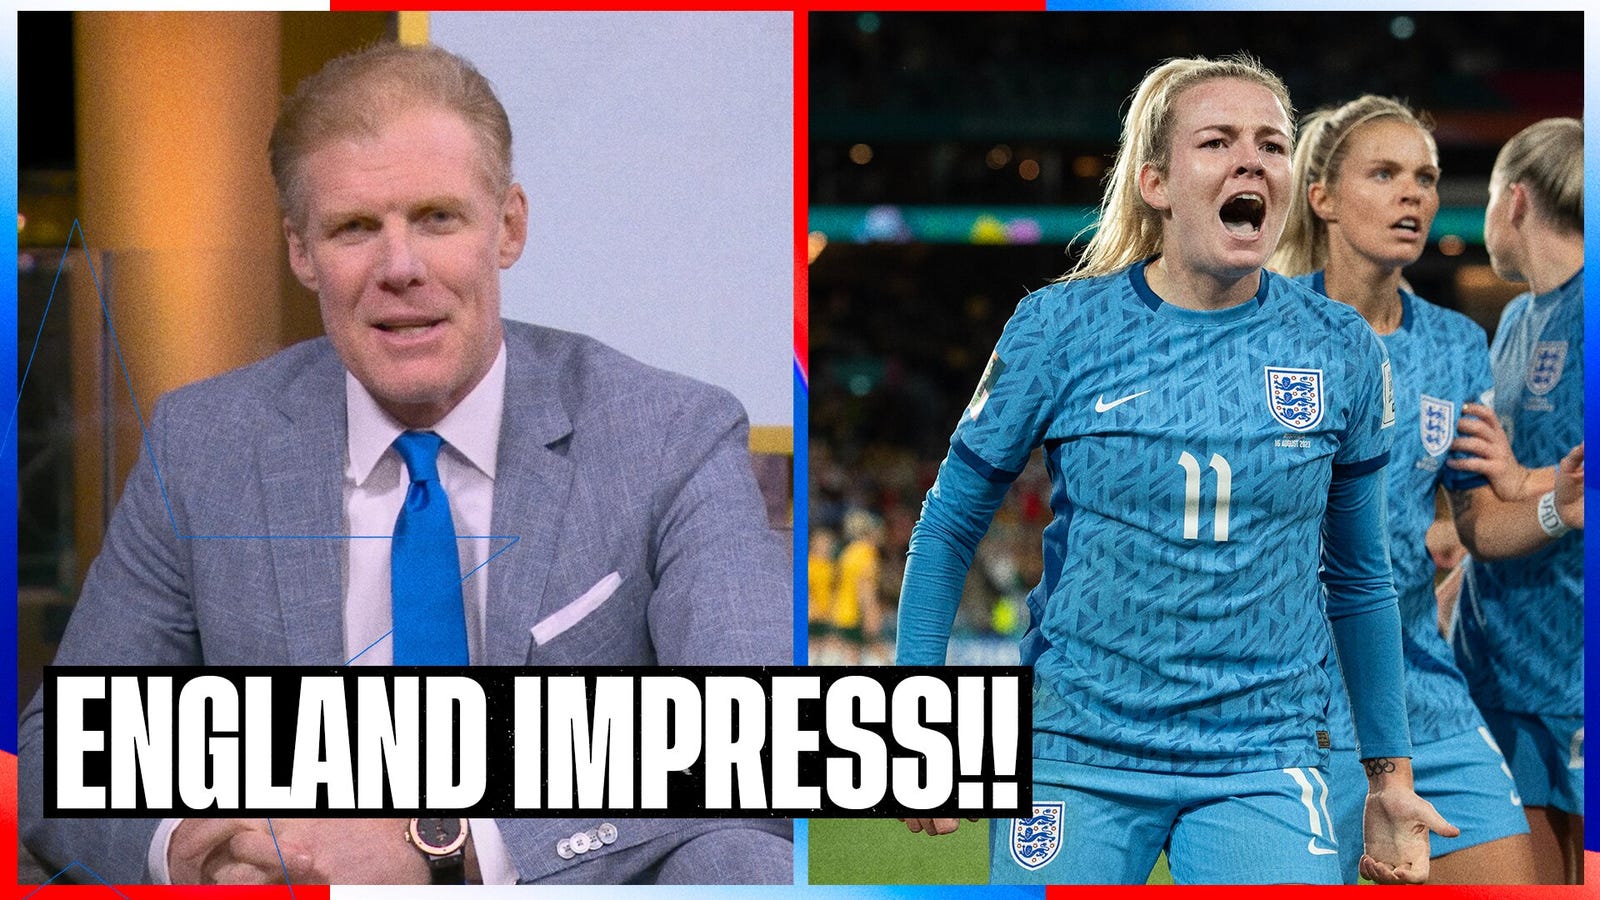 Alexi Lalas reacts to England's dominant victory over Australia